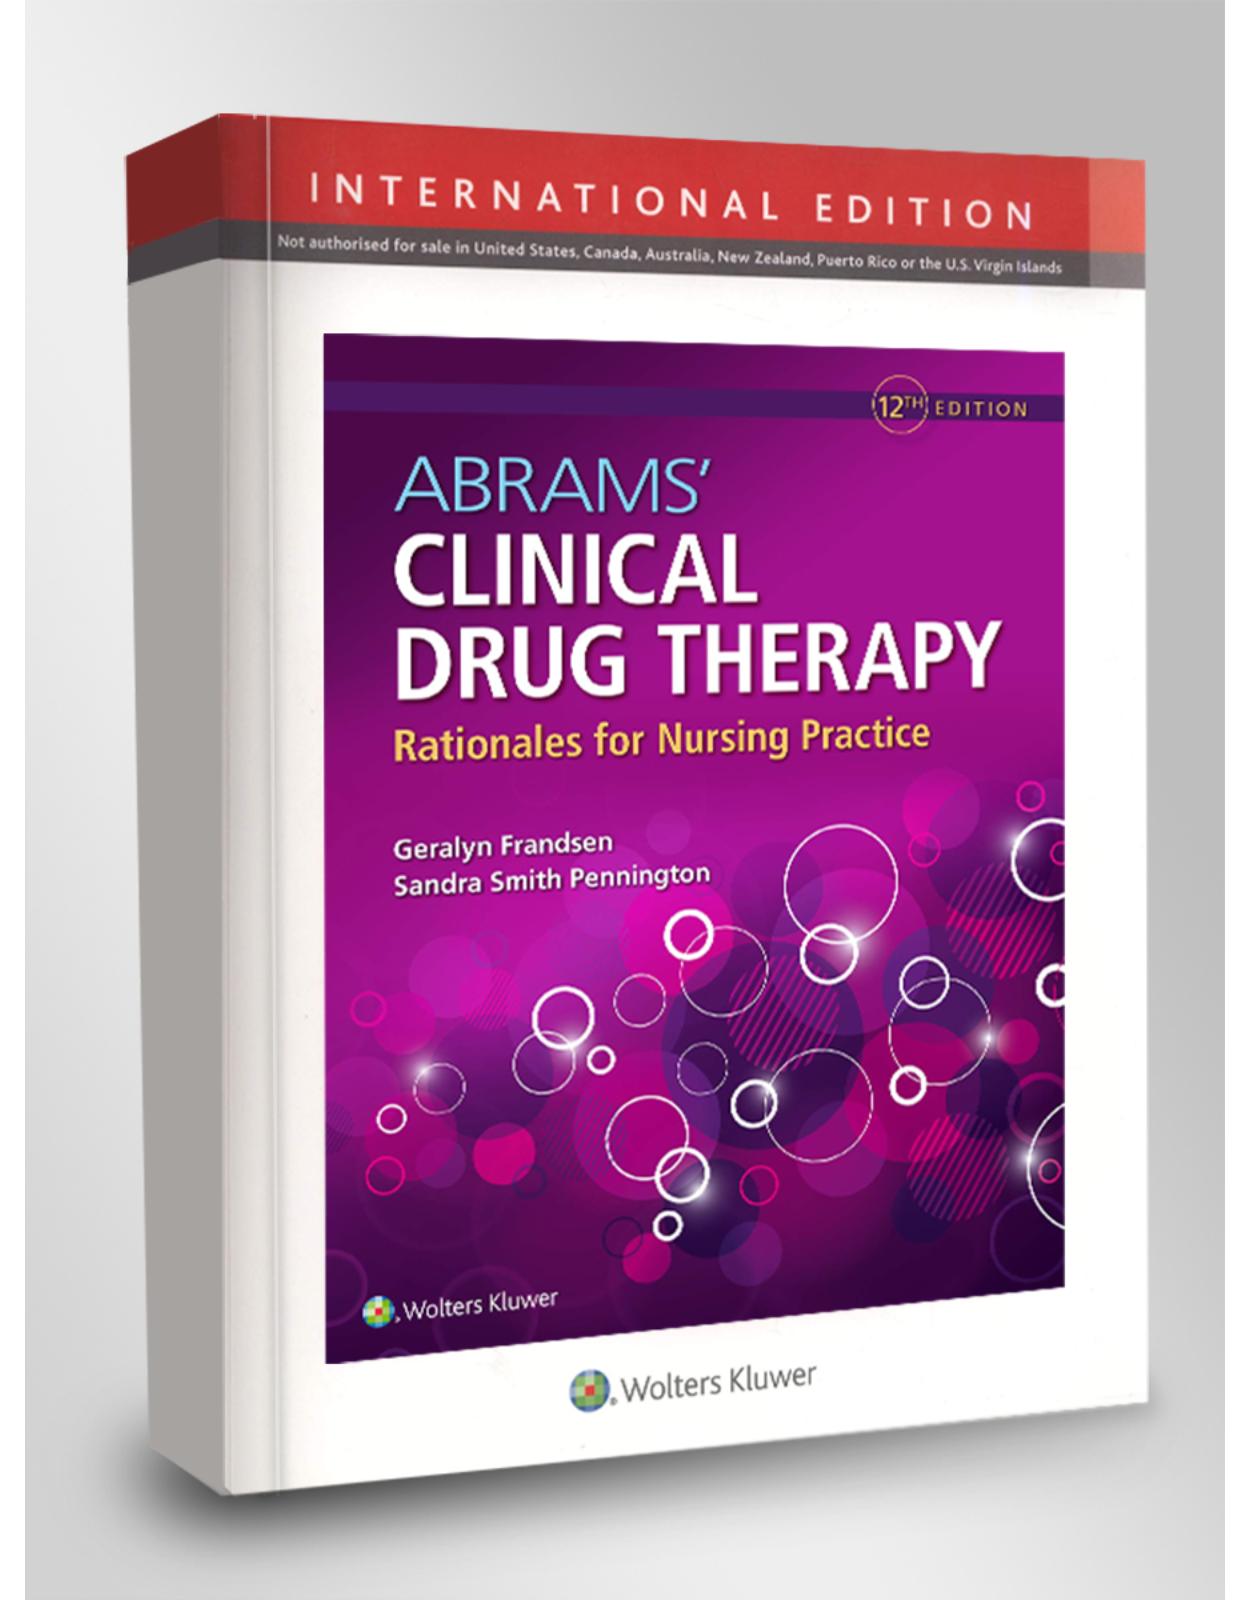 Abrams’ Clinical Drug Therapy